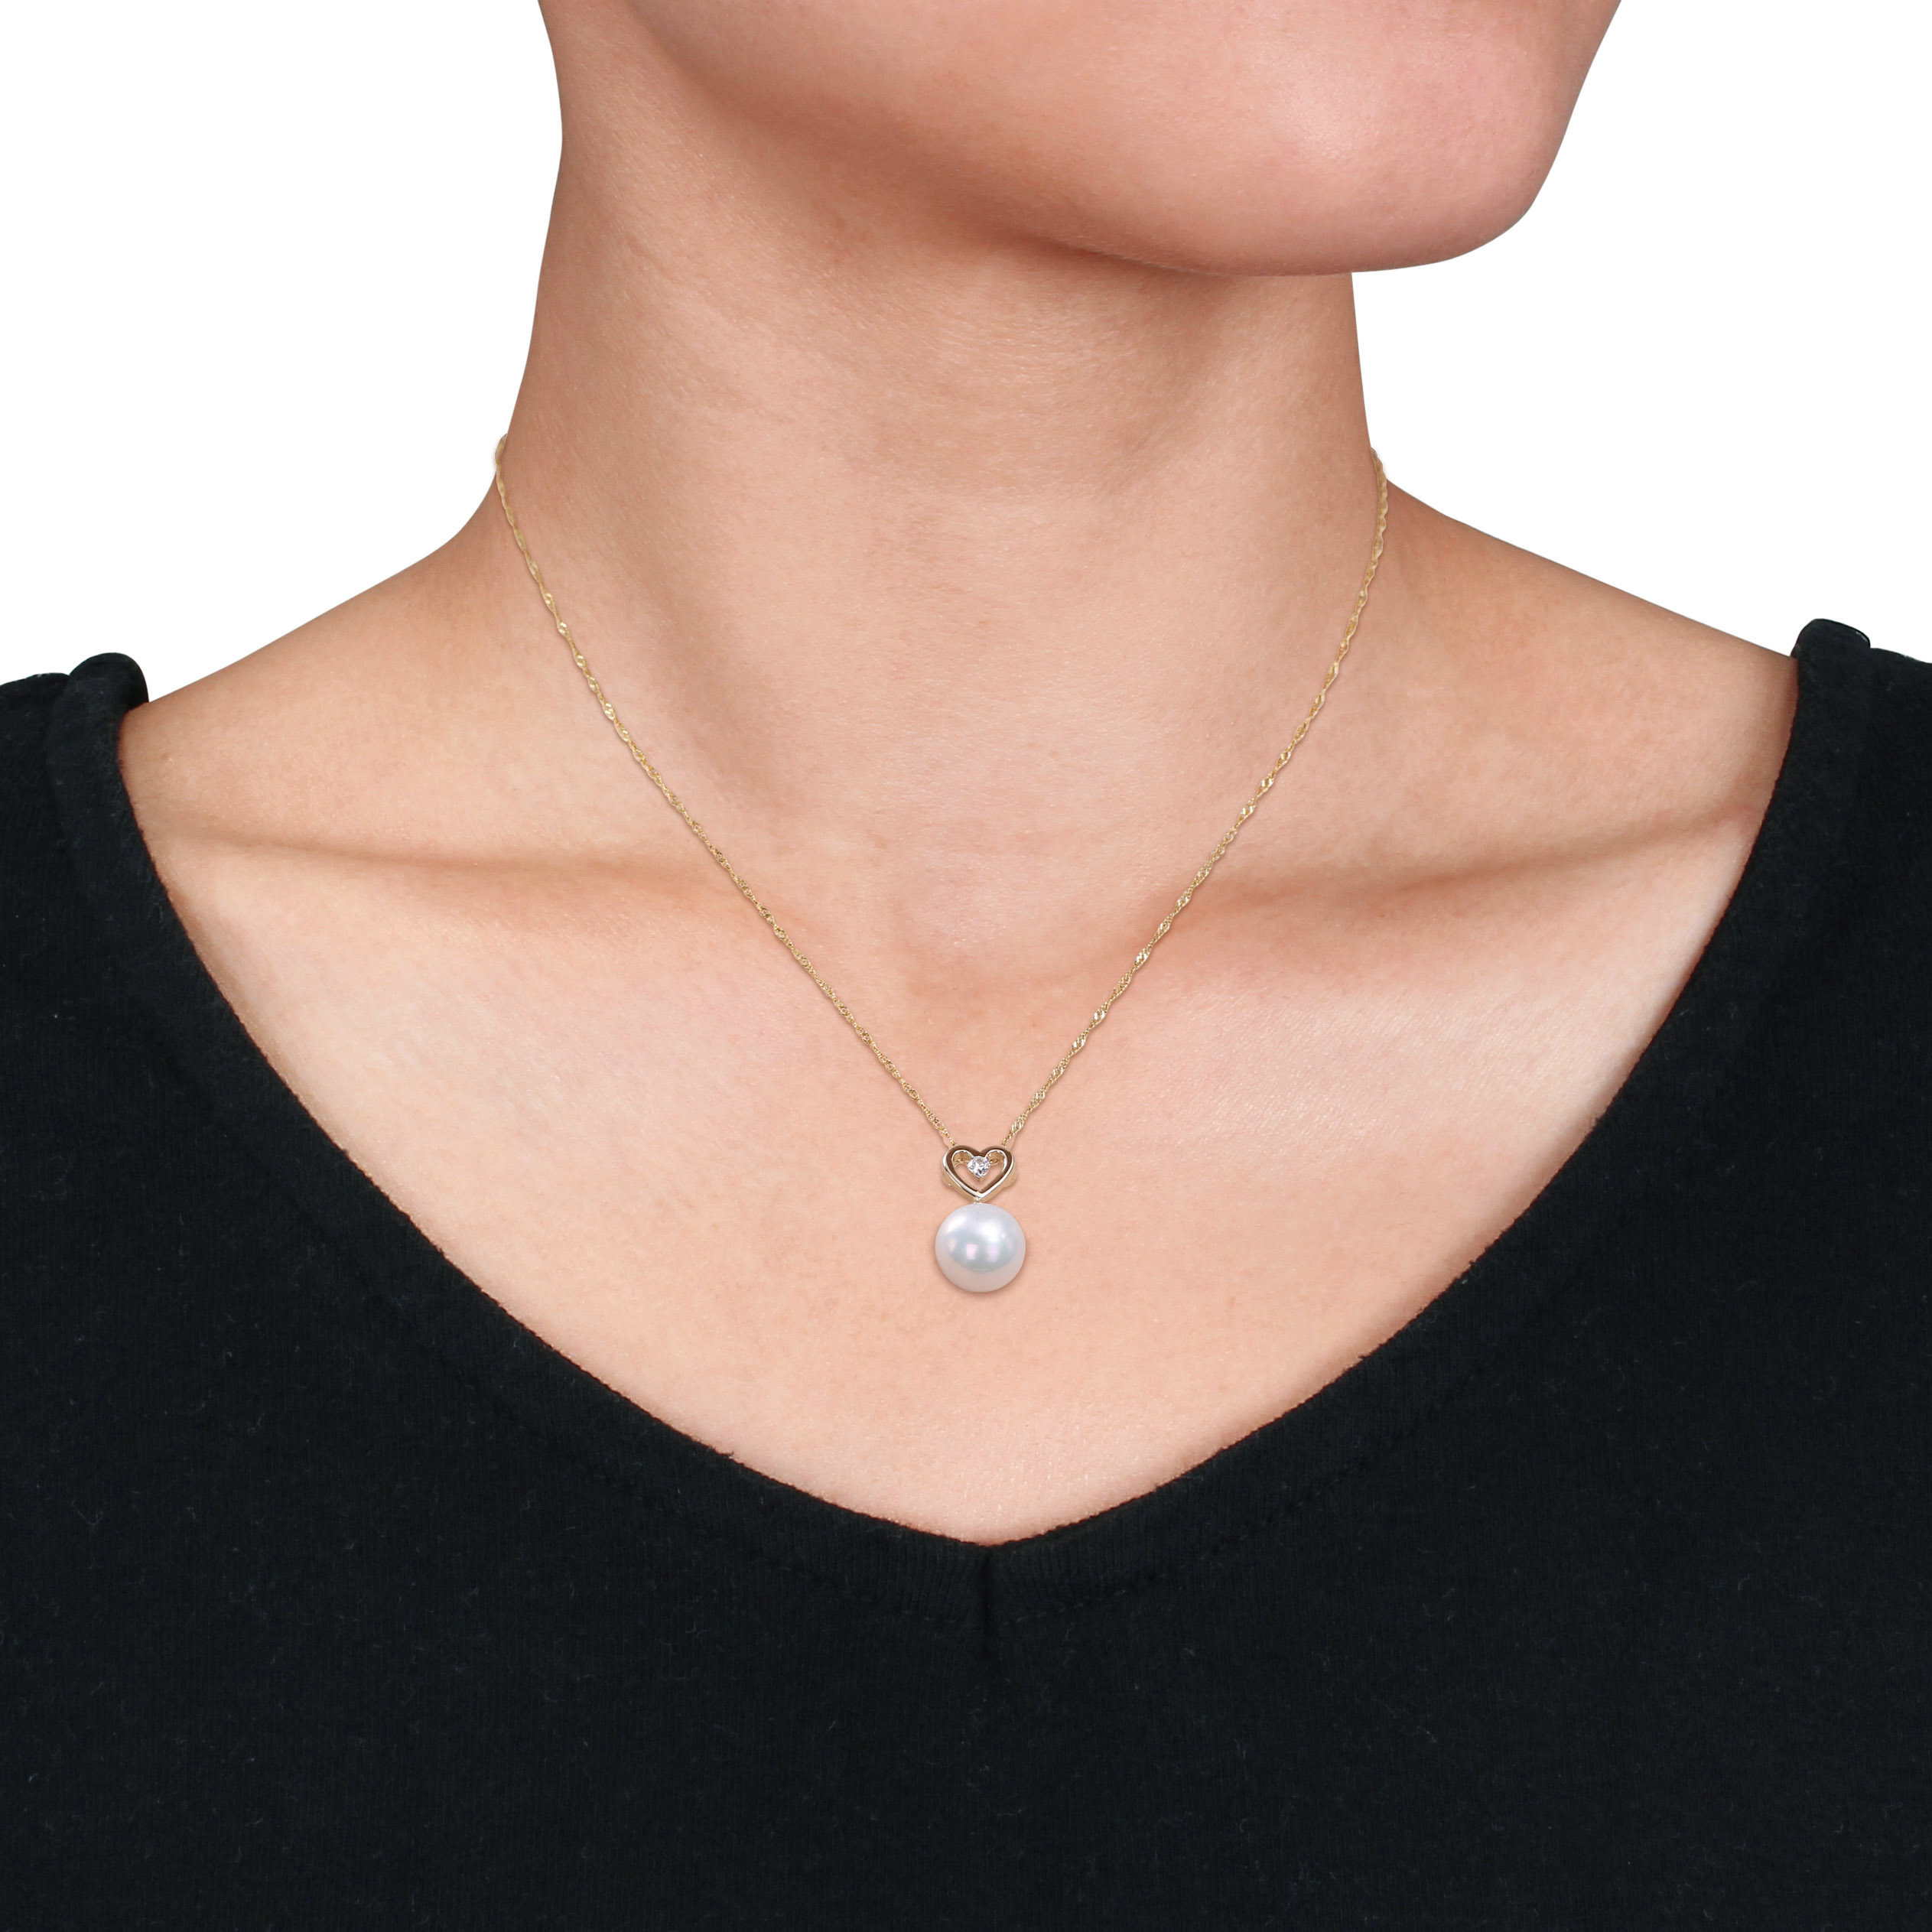 9.5-10 MM Freshwater Cultured Pearl and Diamond Accent Heart Drop Pendant with Chain in 10k Yellow Gold